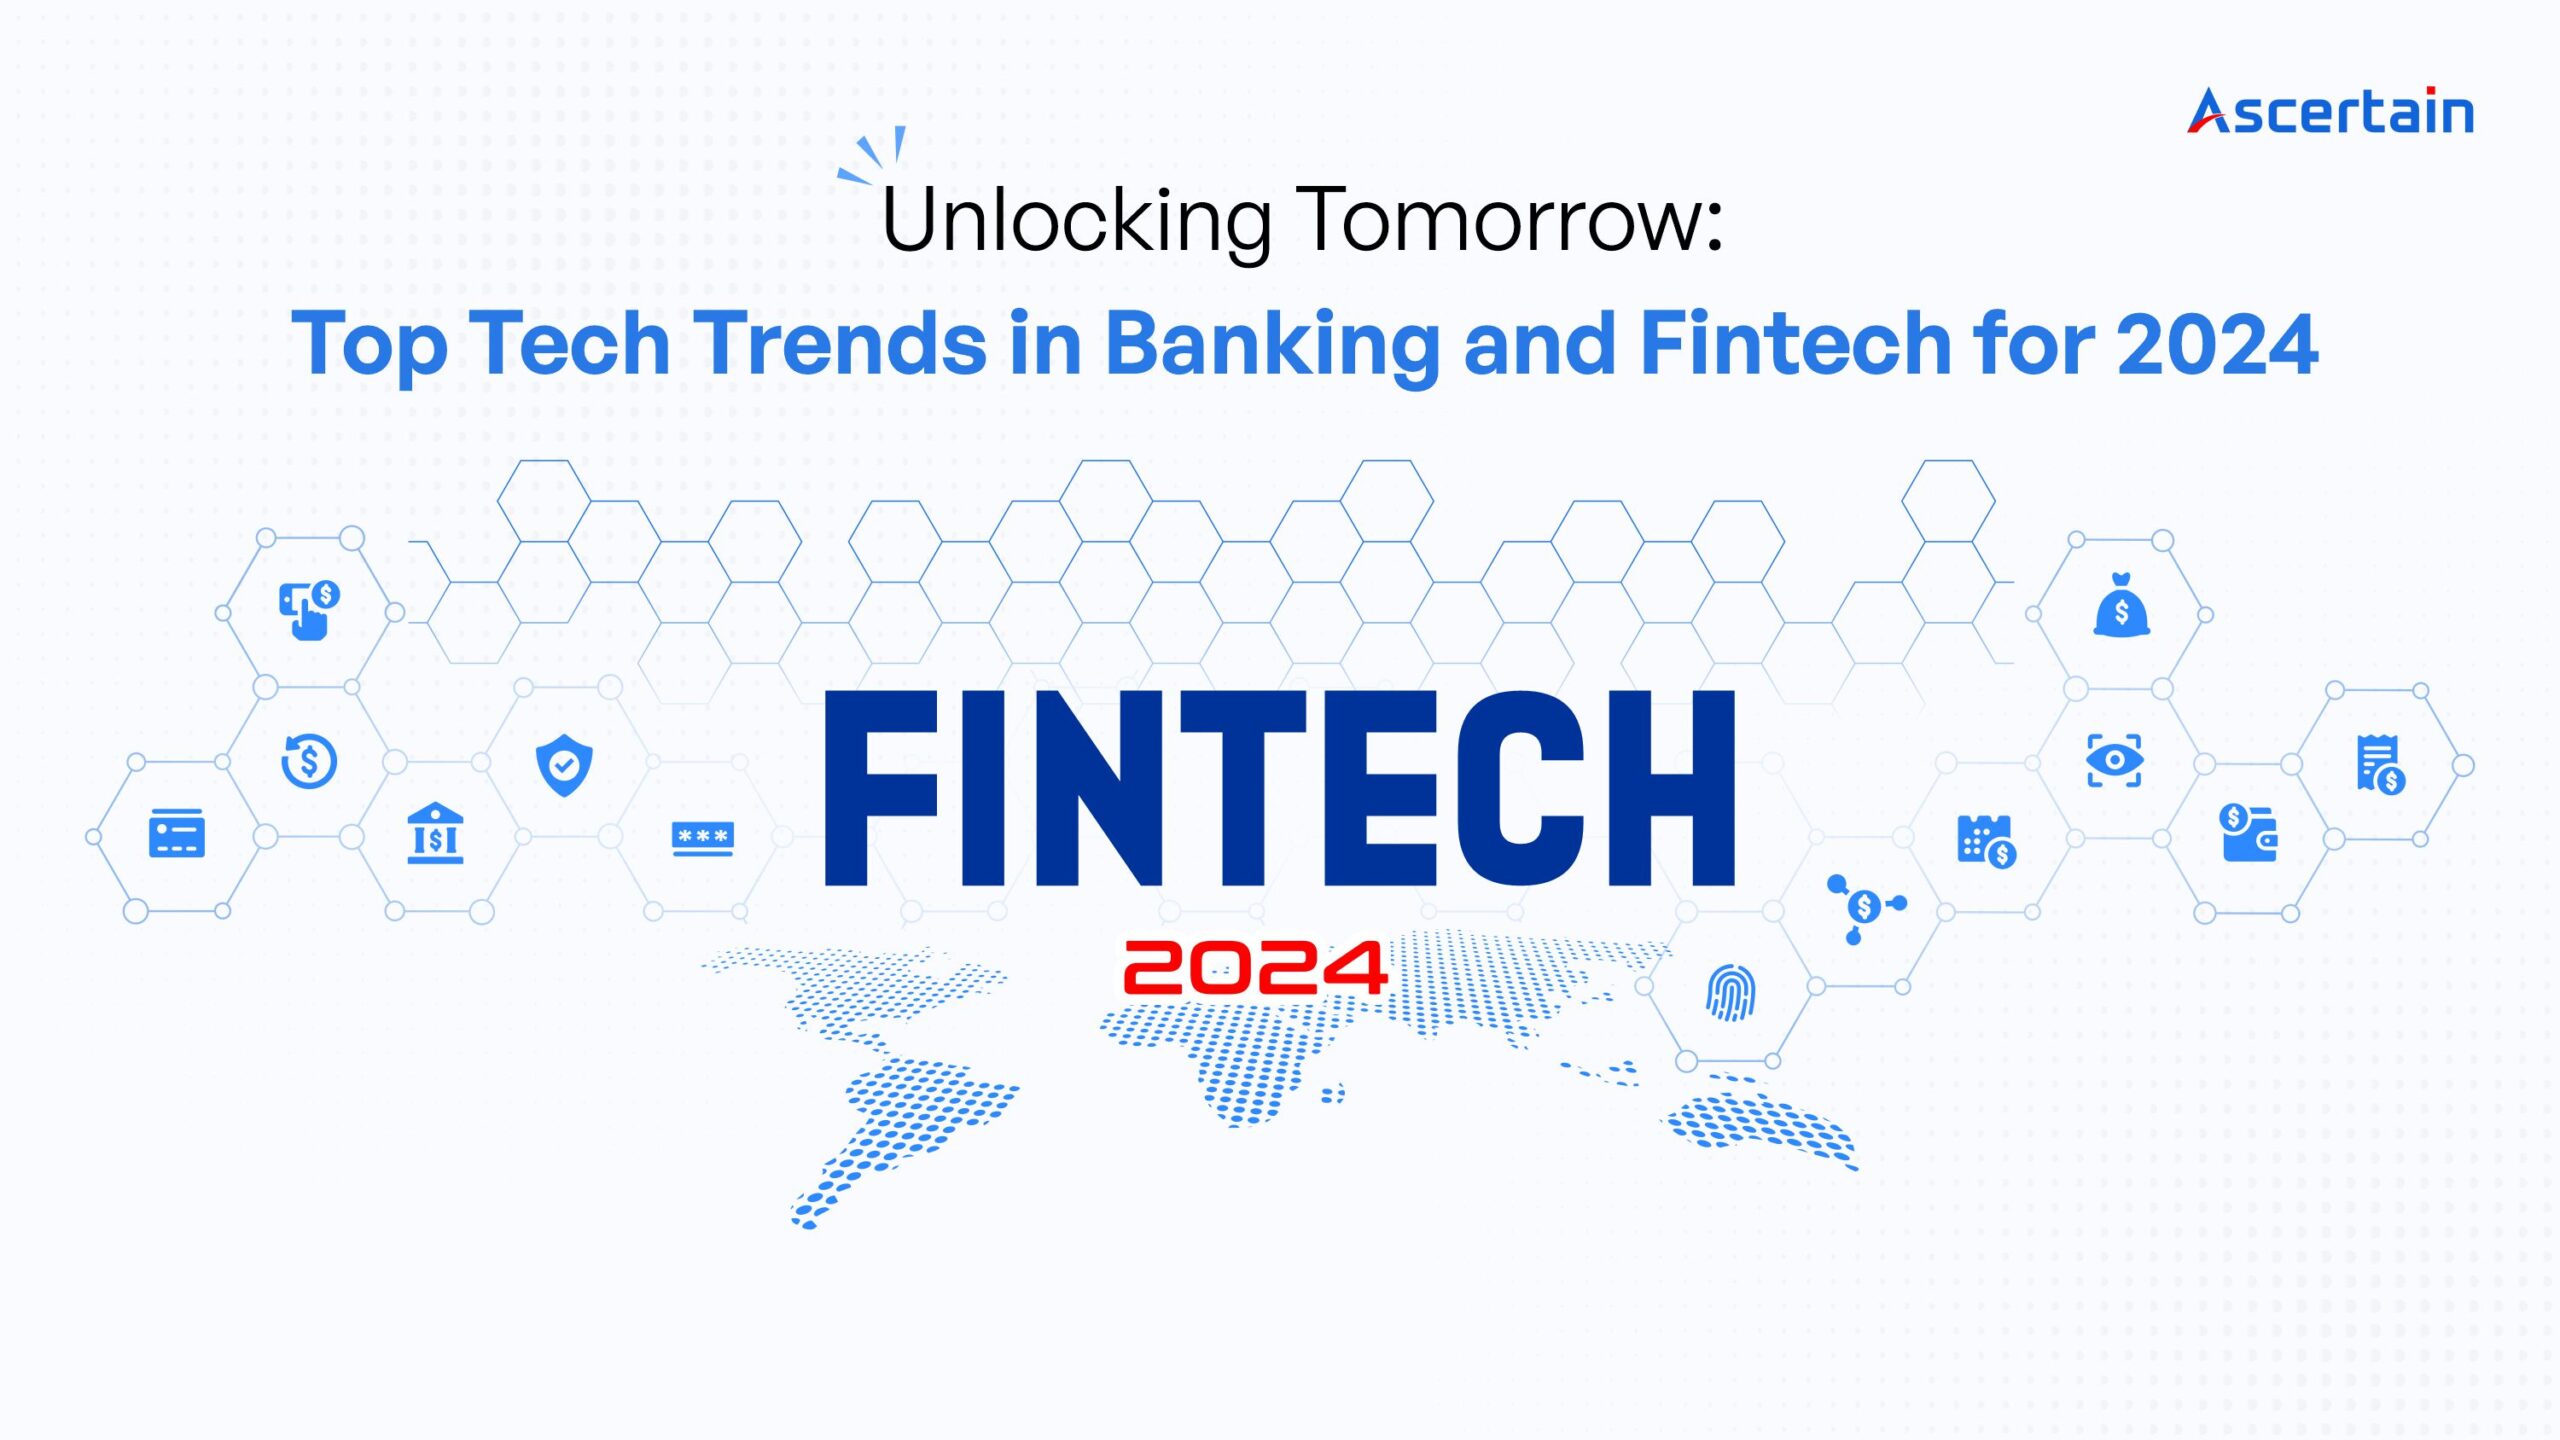 Technology trends in banking and fintech 2024 - Ascertain Technologies